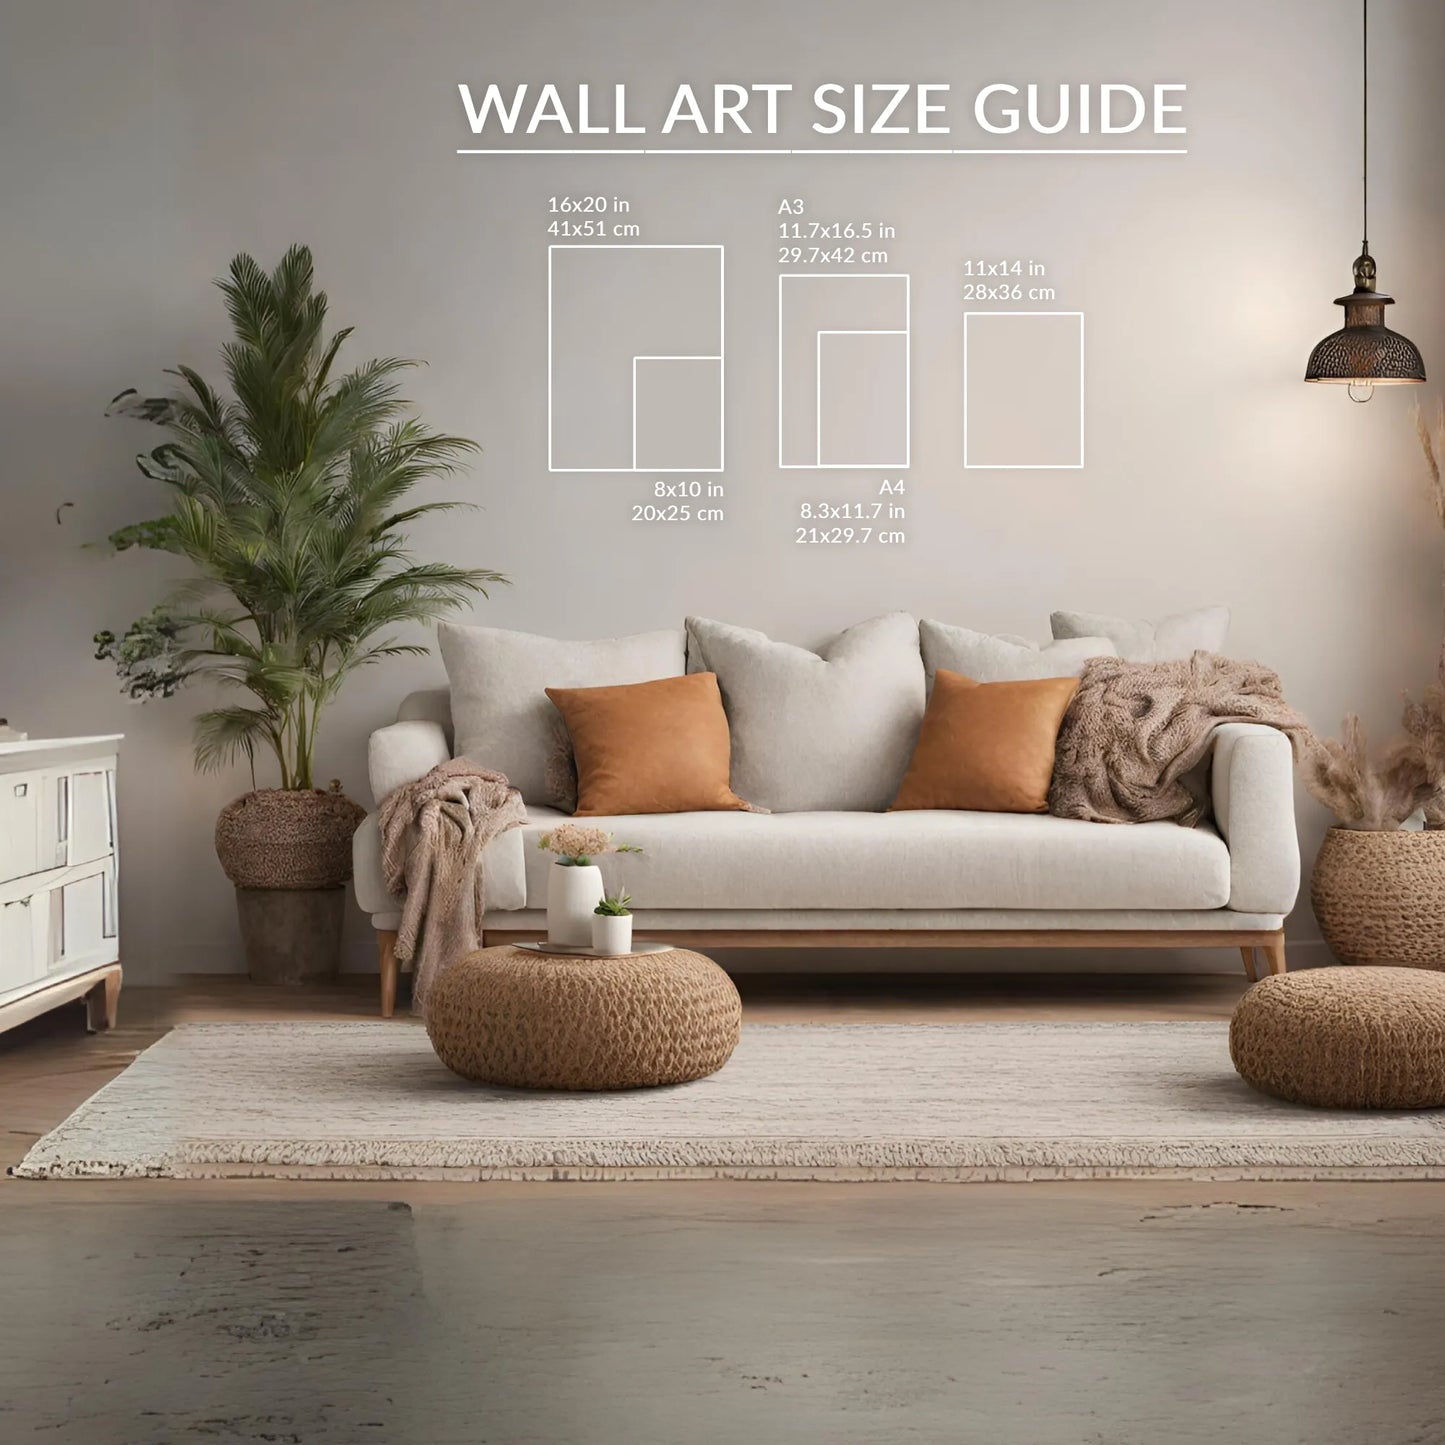 Picture Collage Template Wall Art Size Guide